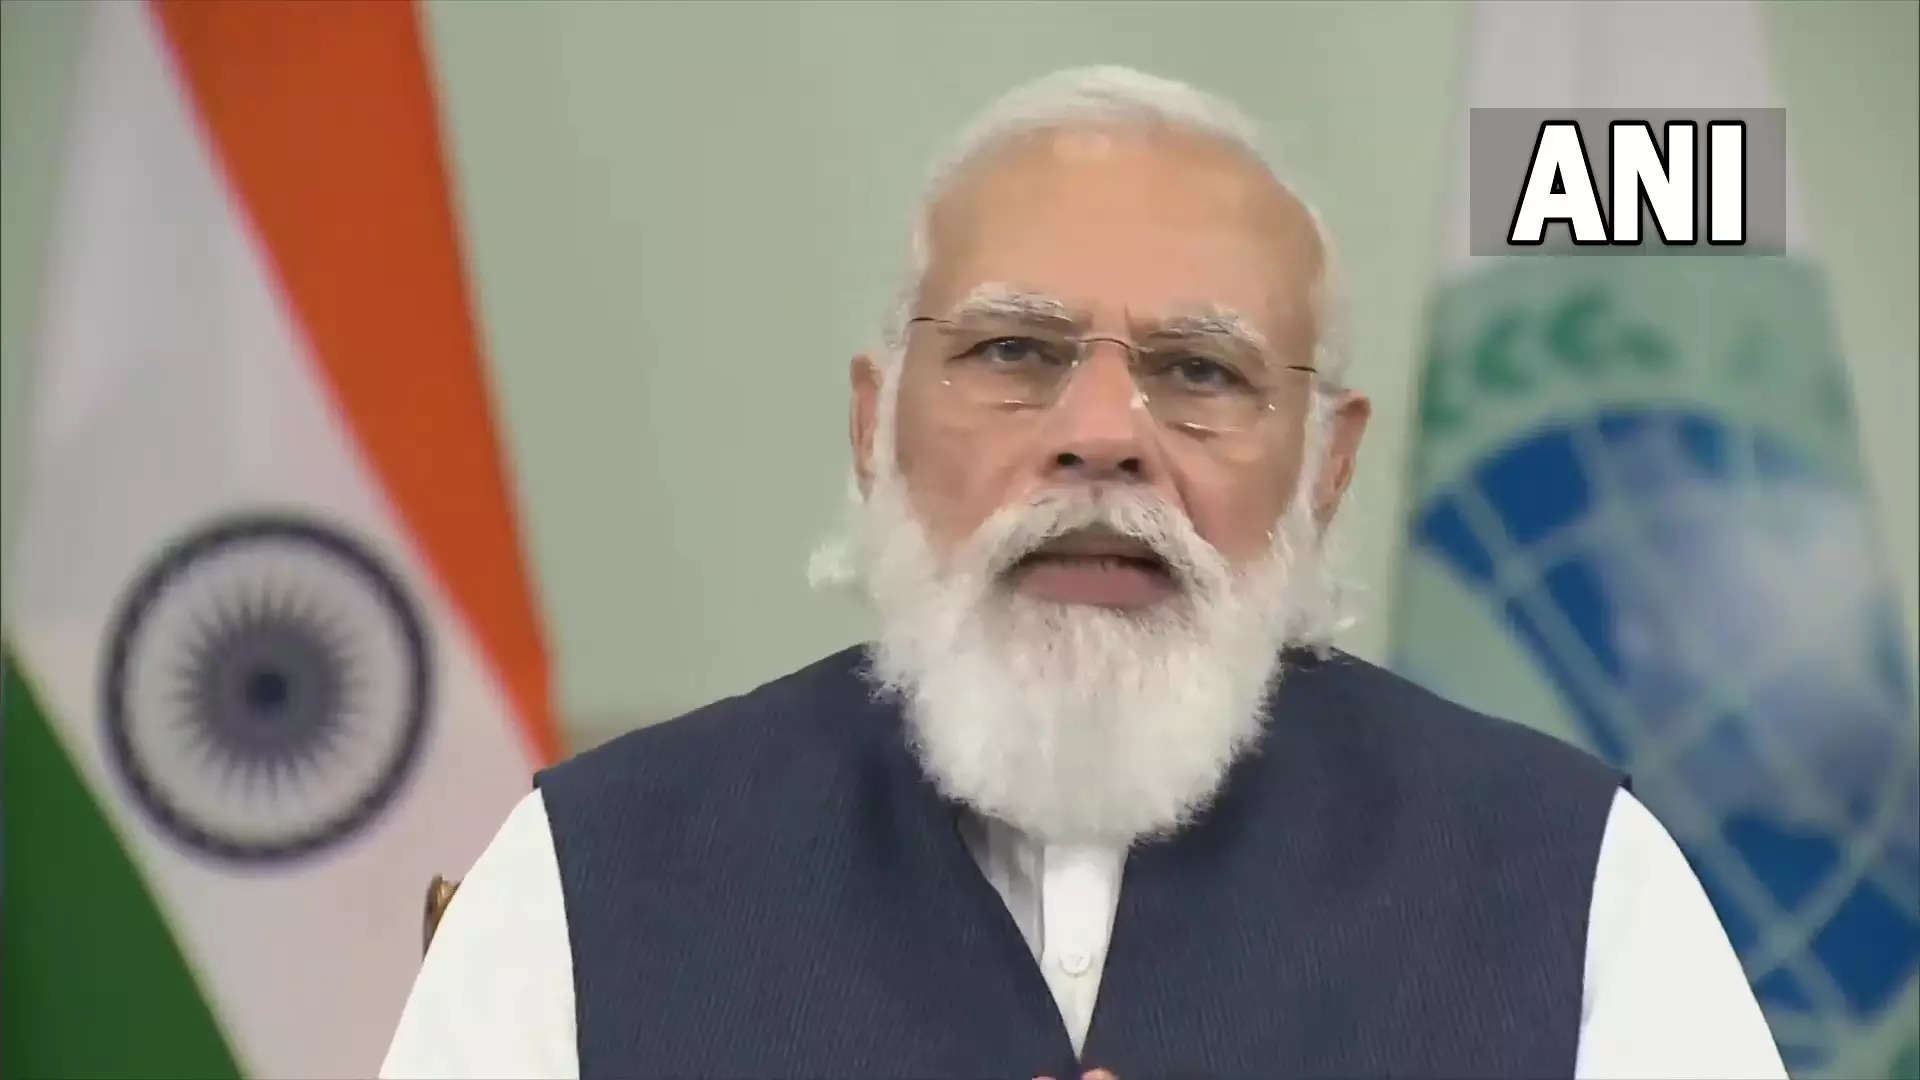 PM Modi addressed the SCO Summit via video conferencing on Friday